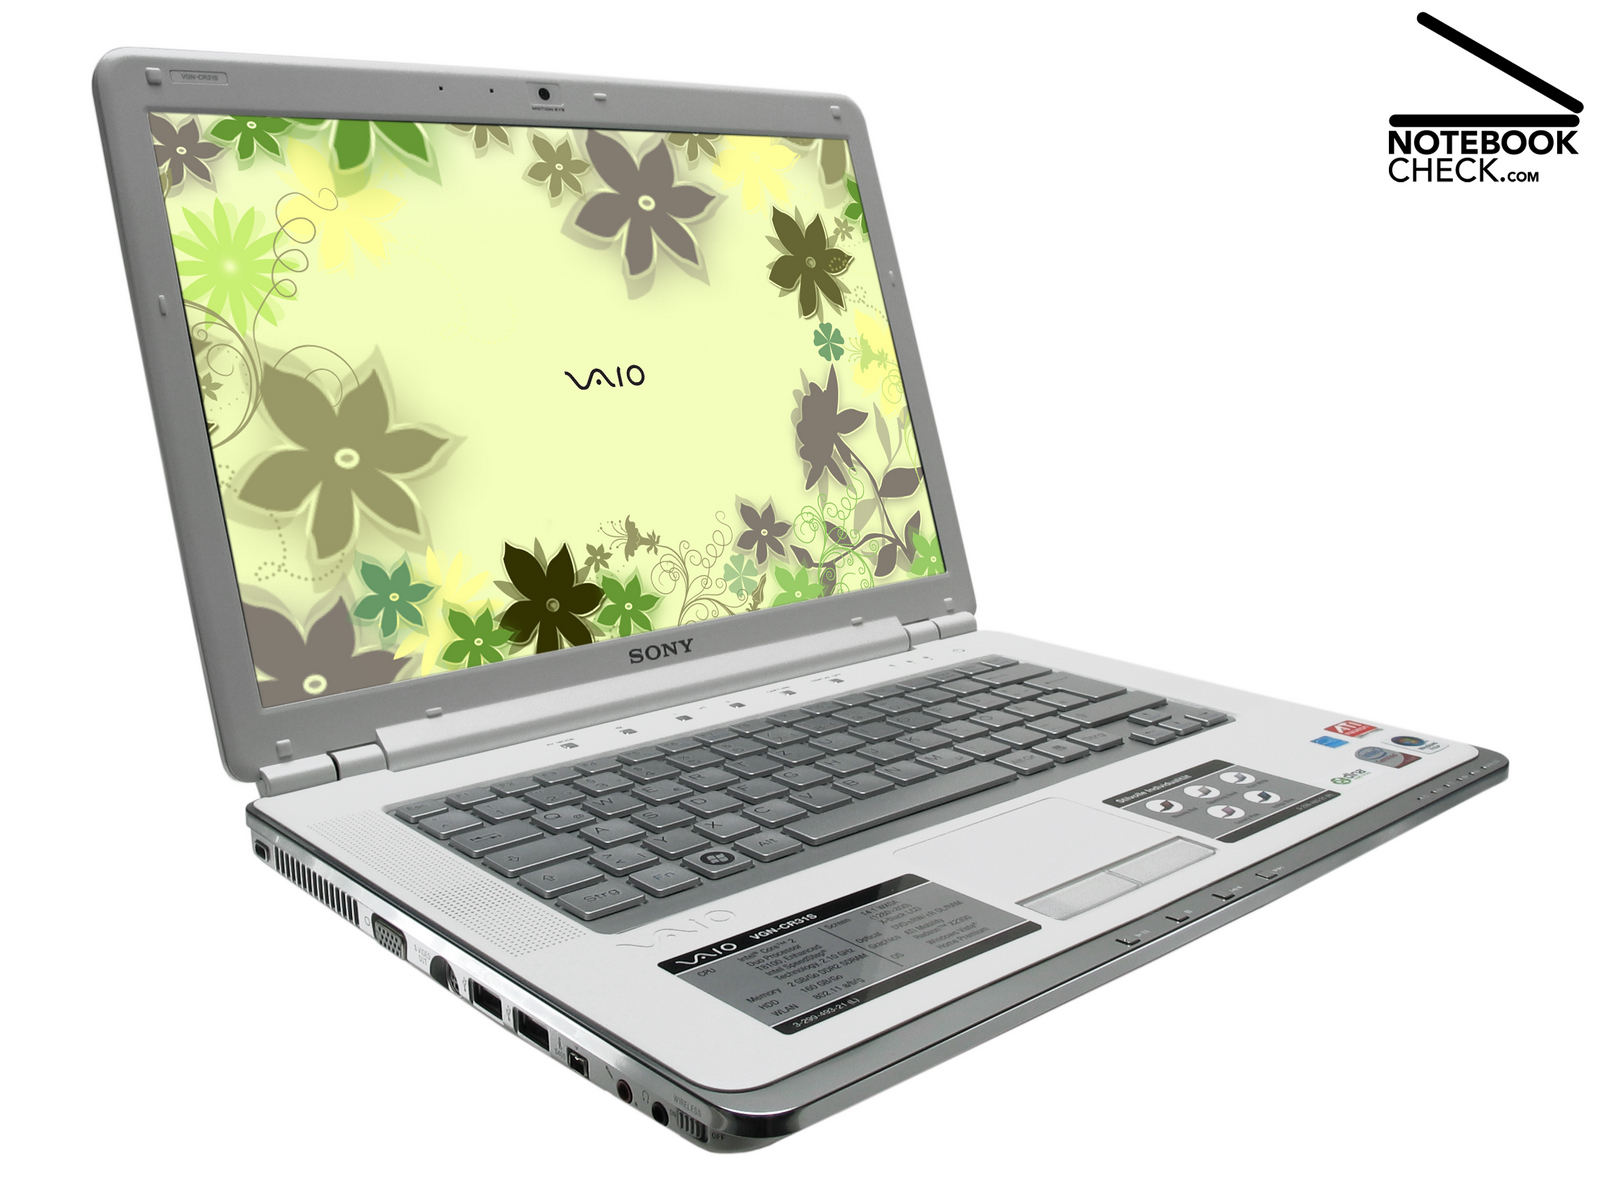 Vaio vgn-s460 drivers for mac